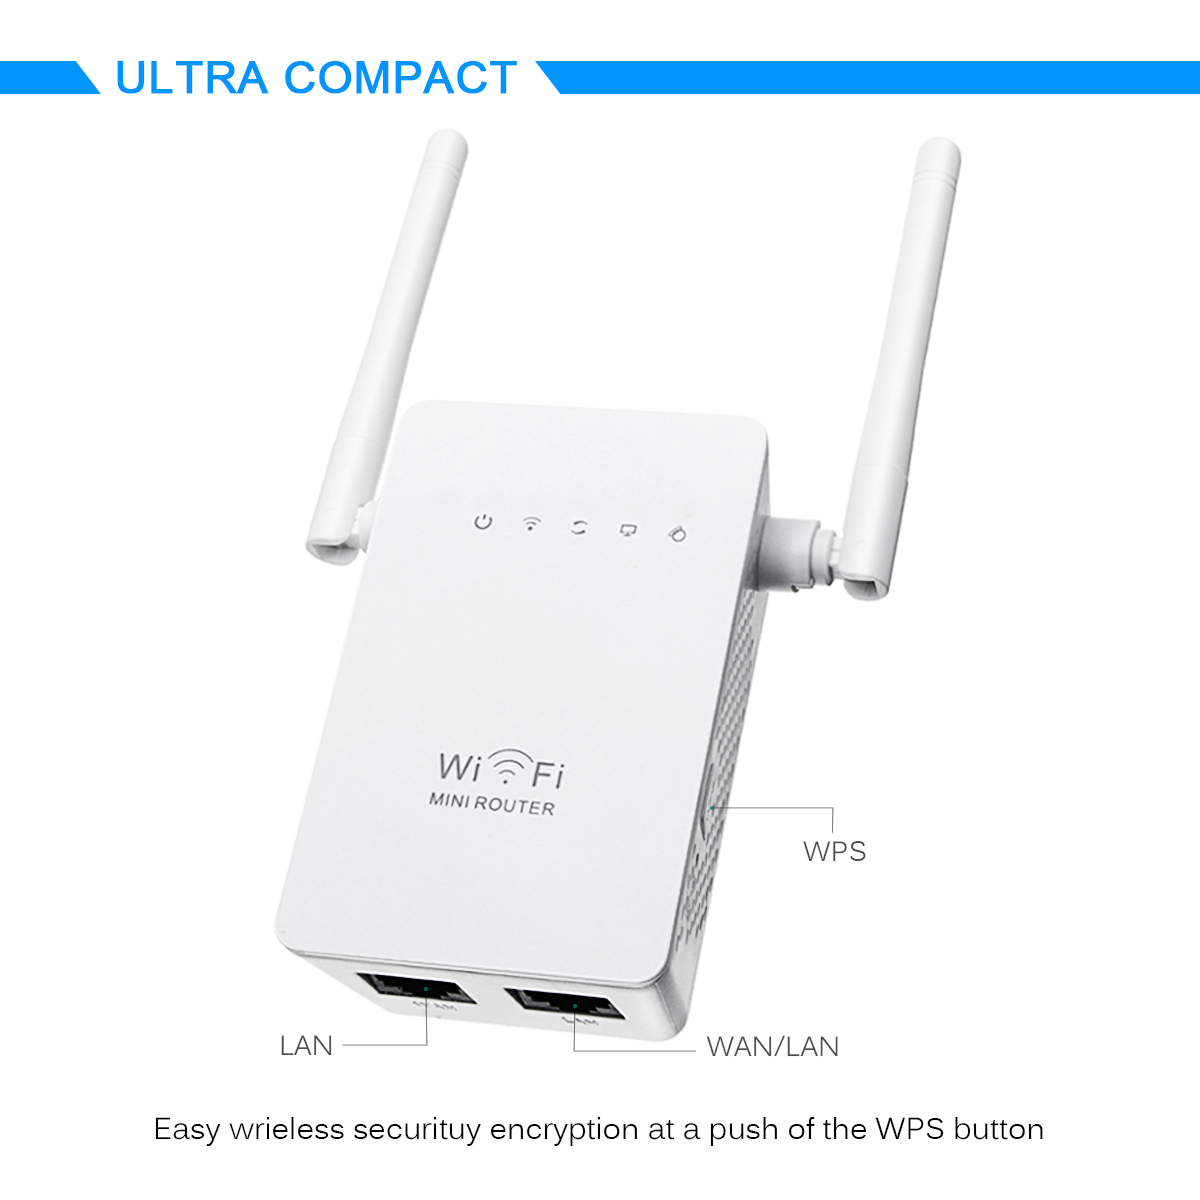 300Mbps-Wireless-Wifi-Range-Repeater-Booster-80211-Dual-Antennas-Wireless-AP-Router-with-LAN-WAN-Por-1257437-4